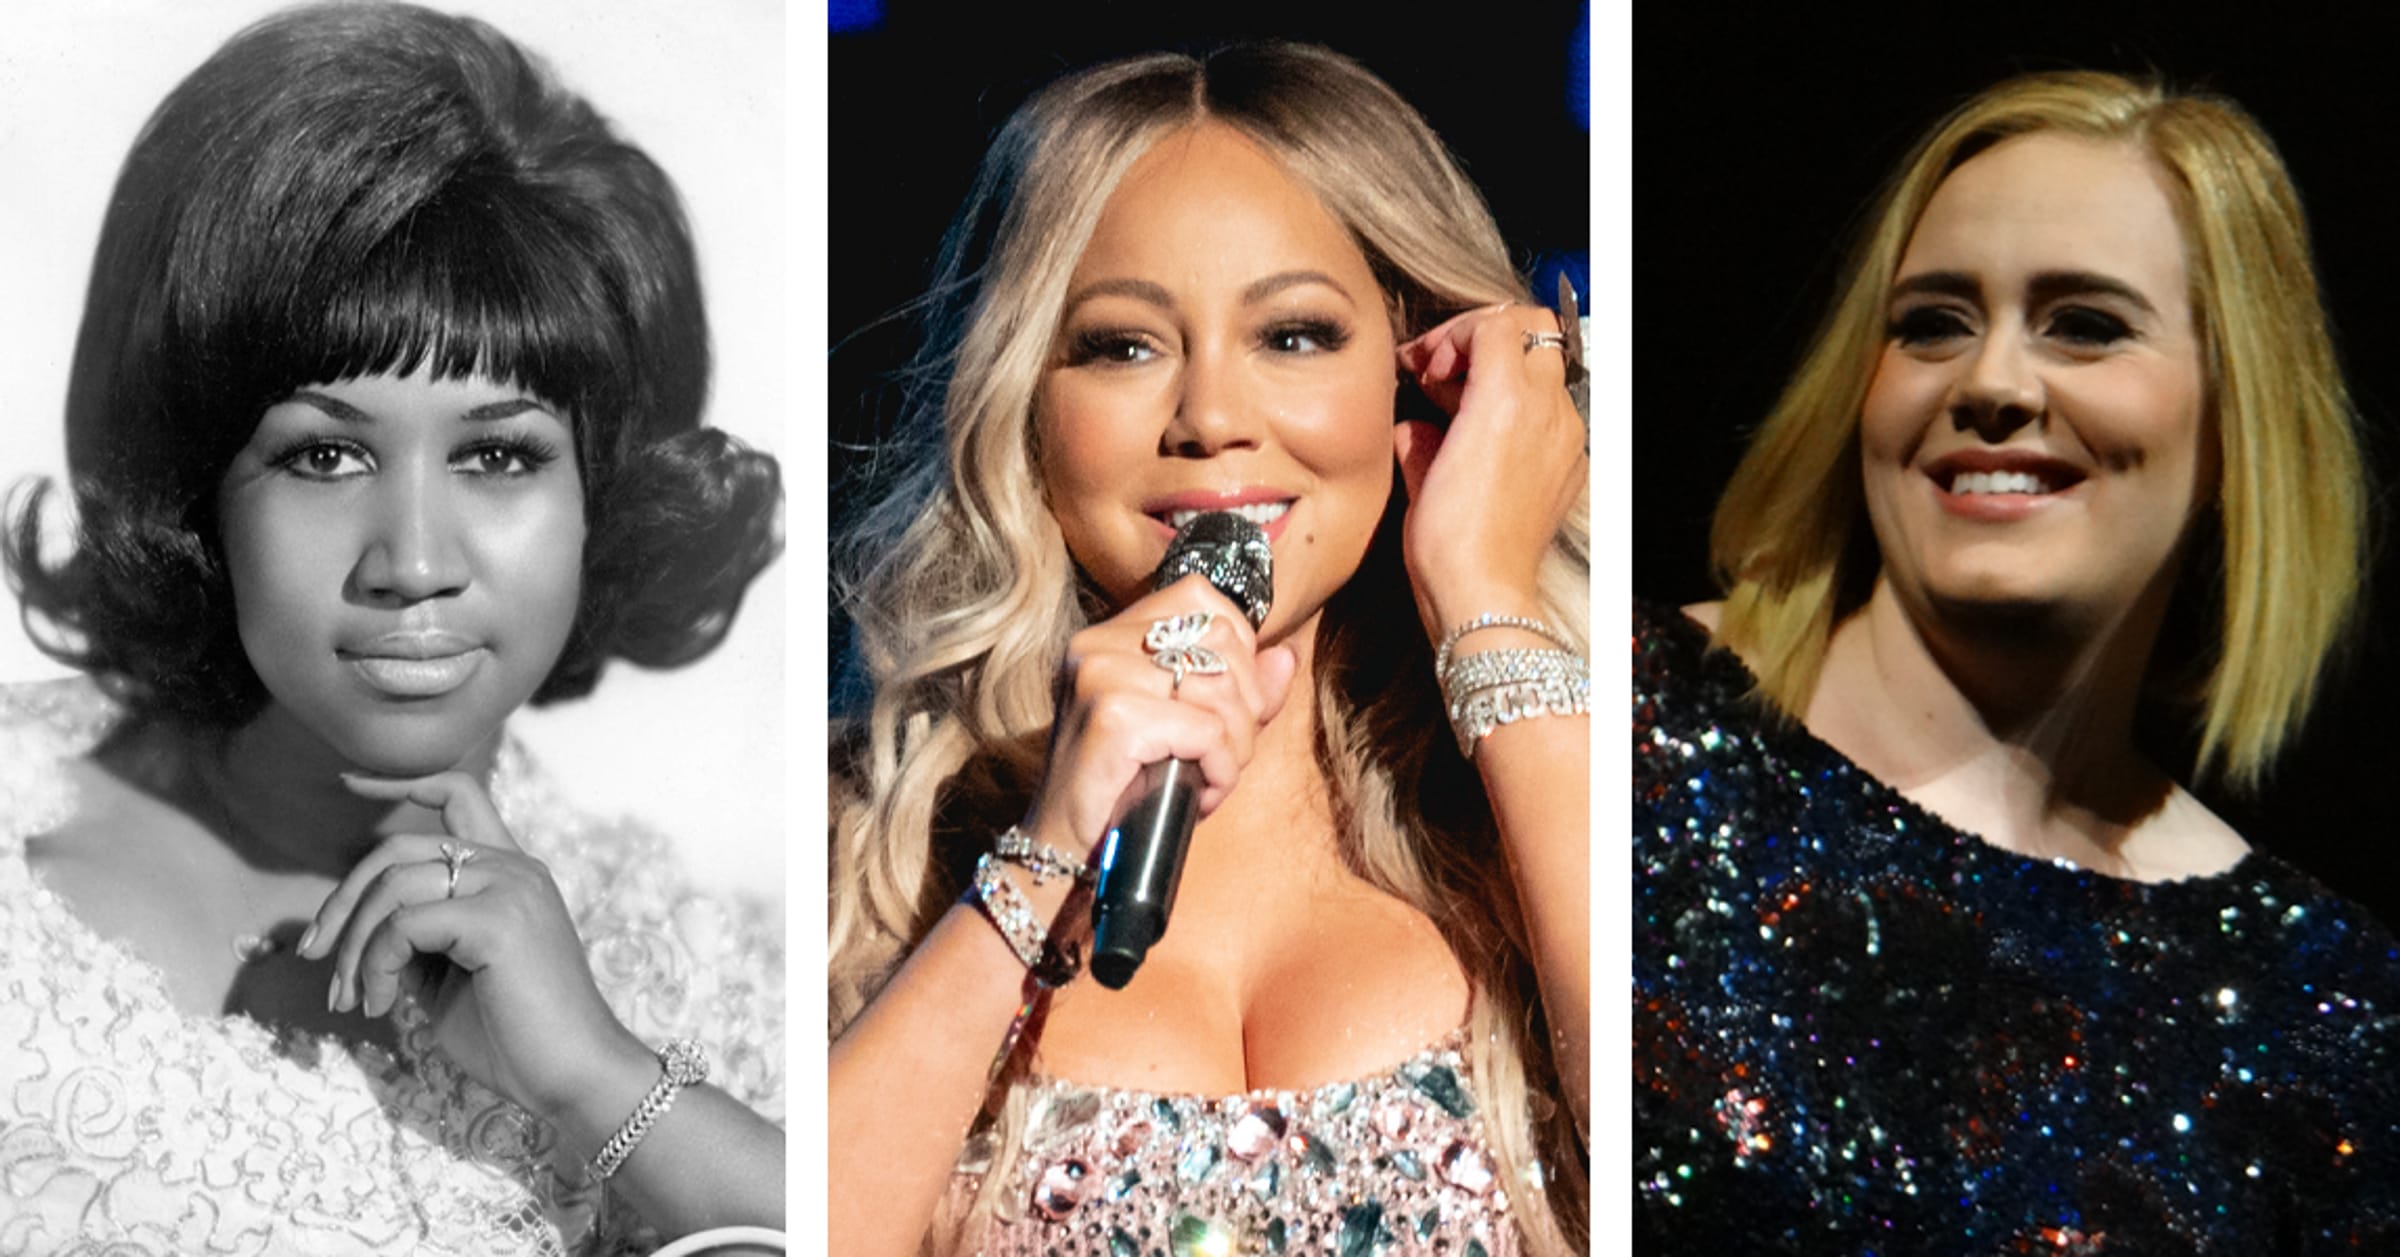 The 30 best female singers of all time, ranked in order of pure